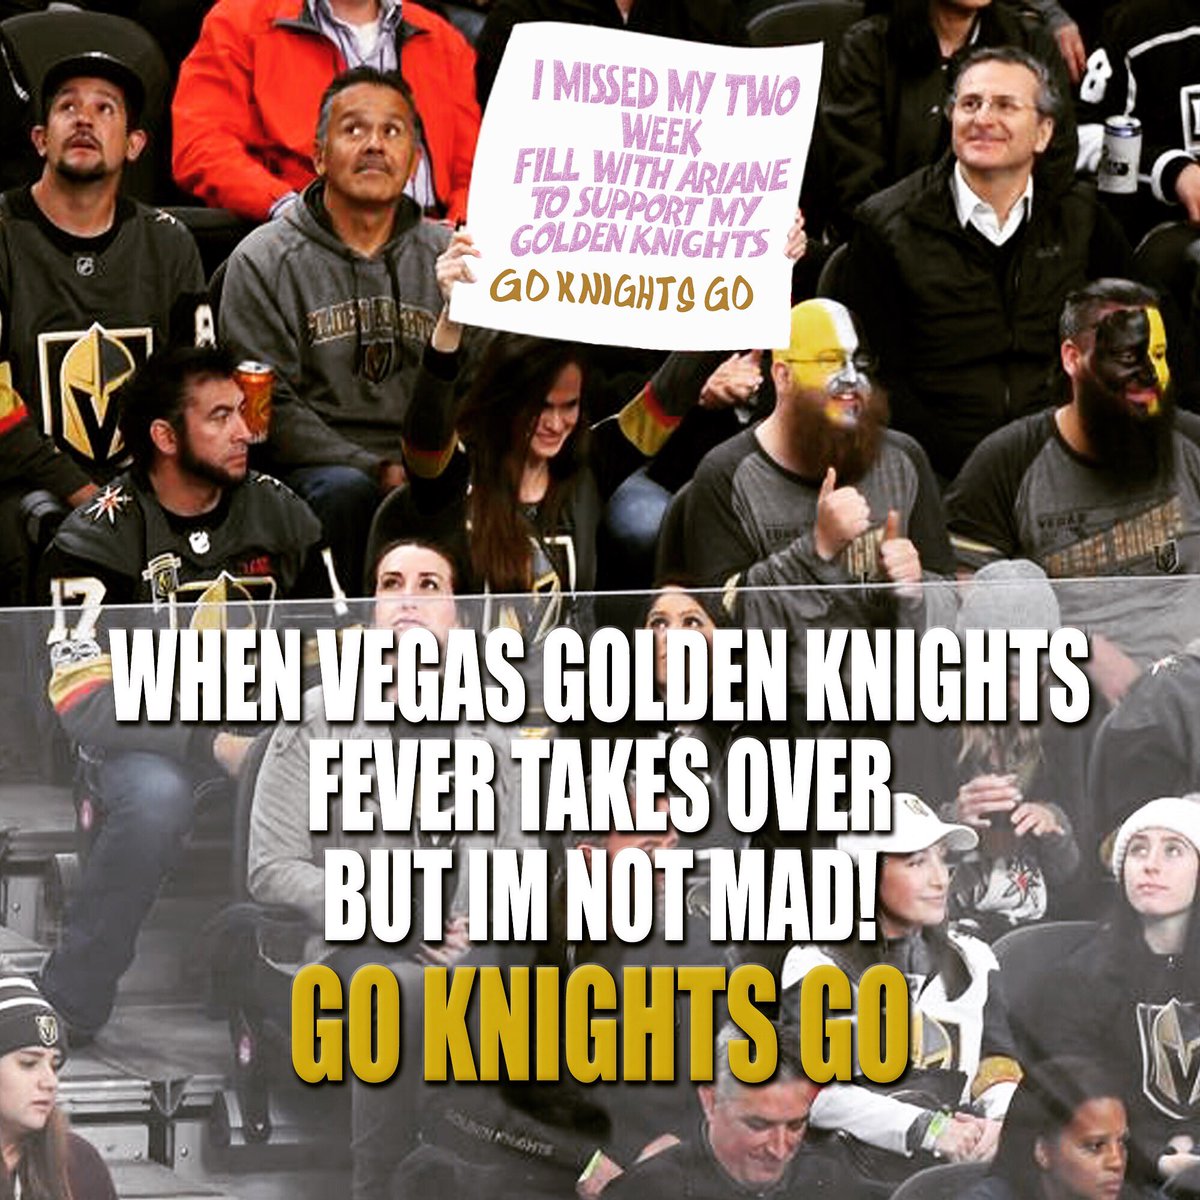 Meme Monday! Had to support the Golden Knights with this Meme!! Congrats on making it to the Stanley Cup Championship Series!  GO KNIGHTS GO!!
•
•
•
#VegasStrong #vegashockey #goldenknights #vegasgoldenknights #goknightsgo #vegasmeme #hockeymeme #LasVegasHockey